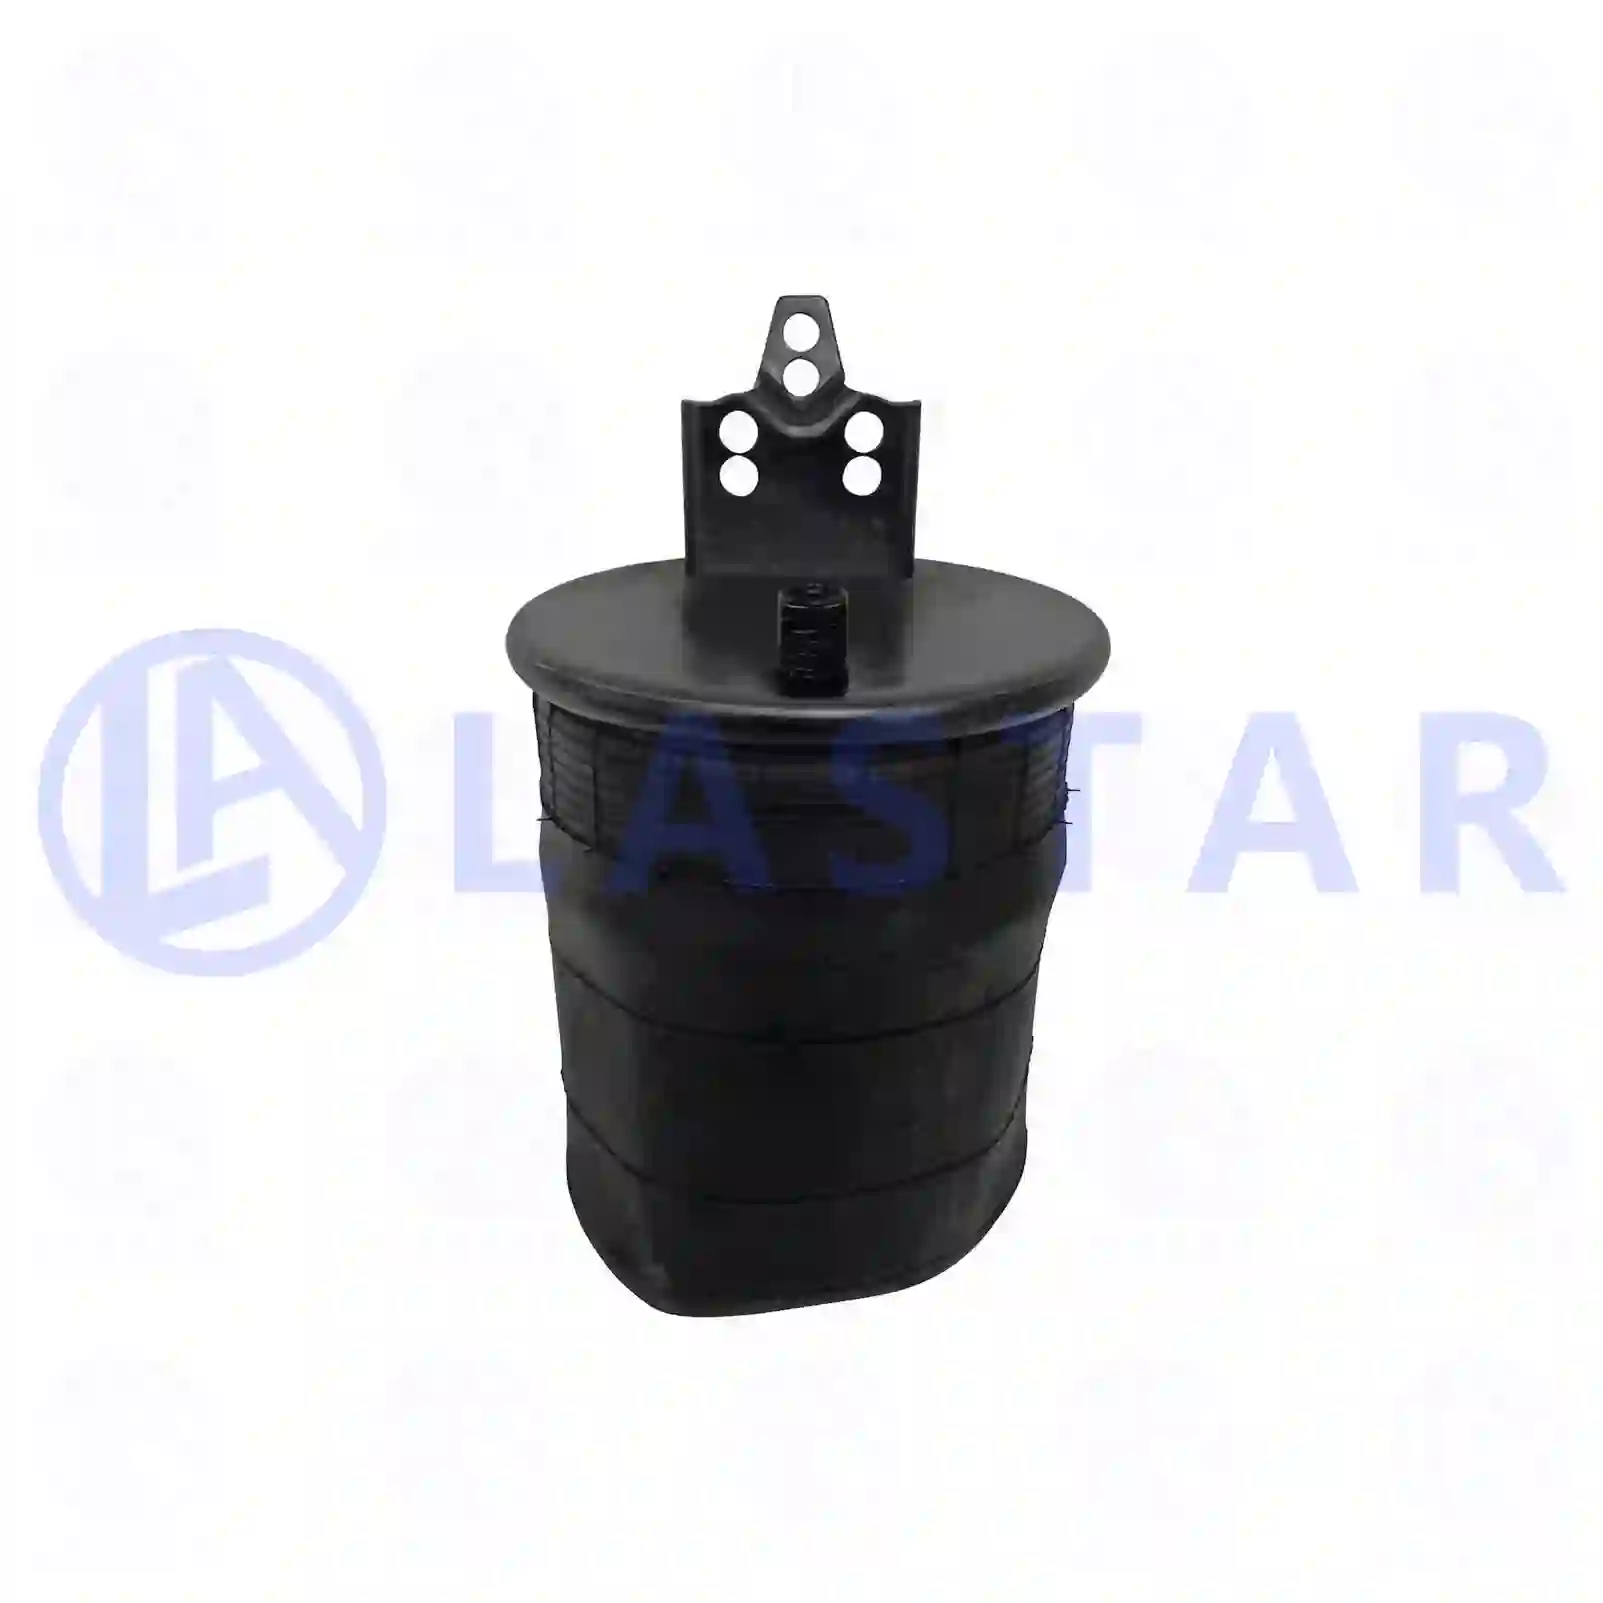 Air spring, with steel piston, 77728695, MLF7151, 1075891, 1076416, 20374510, 20456152, 20531985, 20582215, 21961456, 3171693, ZG40758-0008 ||  77728695 Lastar Spare Part | Truck Spare Parts, Auotomotive Spare Parts Air spring, with steel piston, 77728695, MLF7151, 1075891, 1076416, 20374510, 20456152, 20531985, 20582215, 21961456, 3171693, ZG40758-0008 ||  77728695 Lastar Spare Part | Truck Spare Parts, Auotomotive Spare Parts